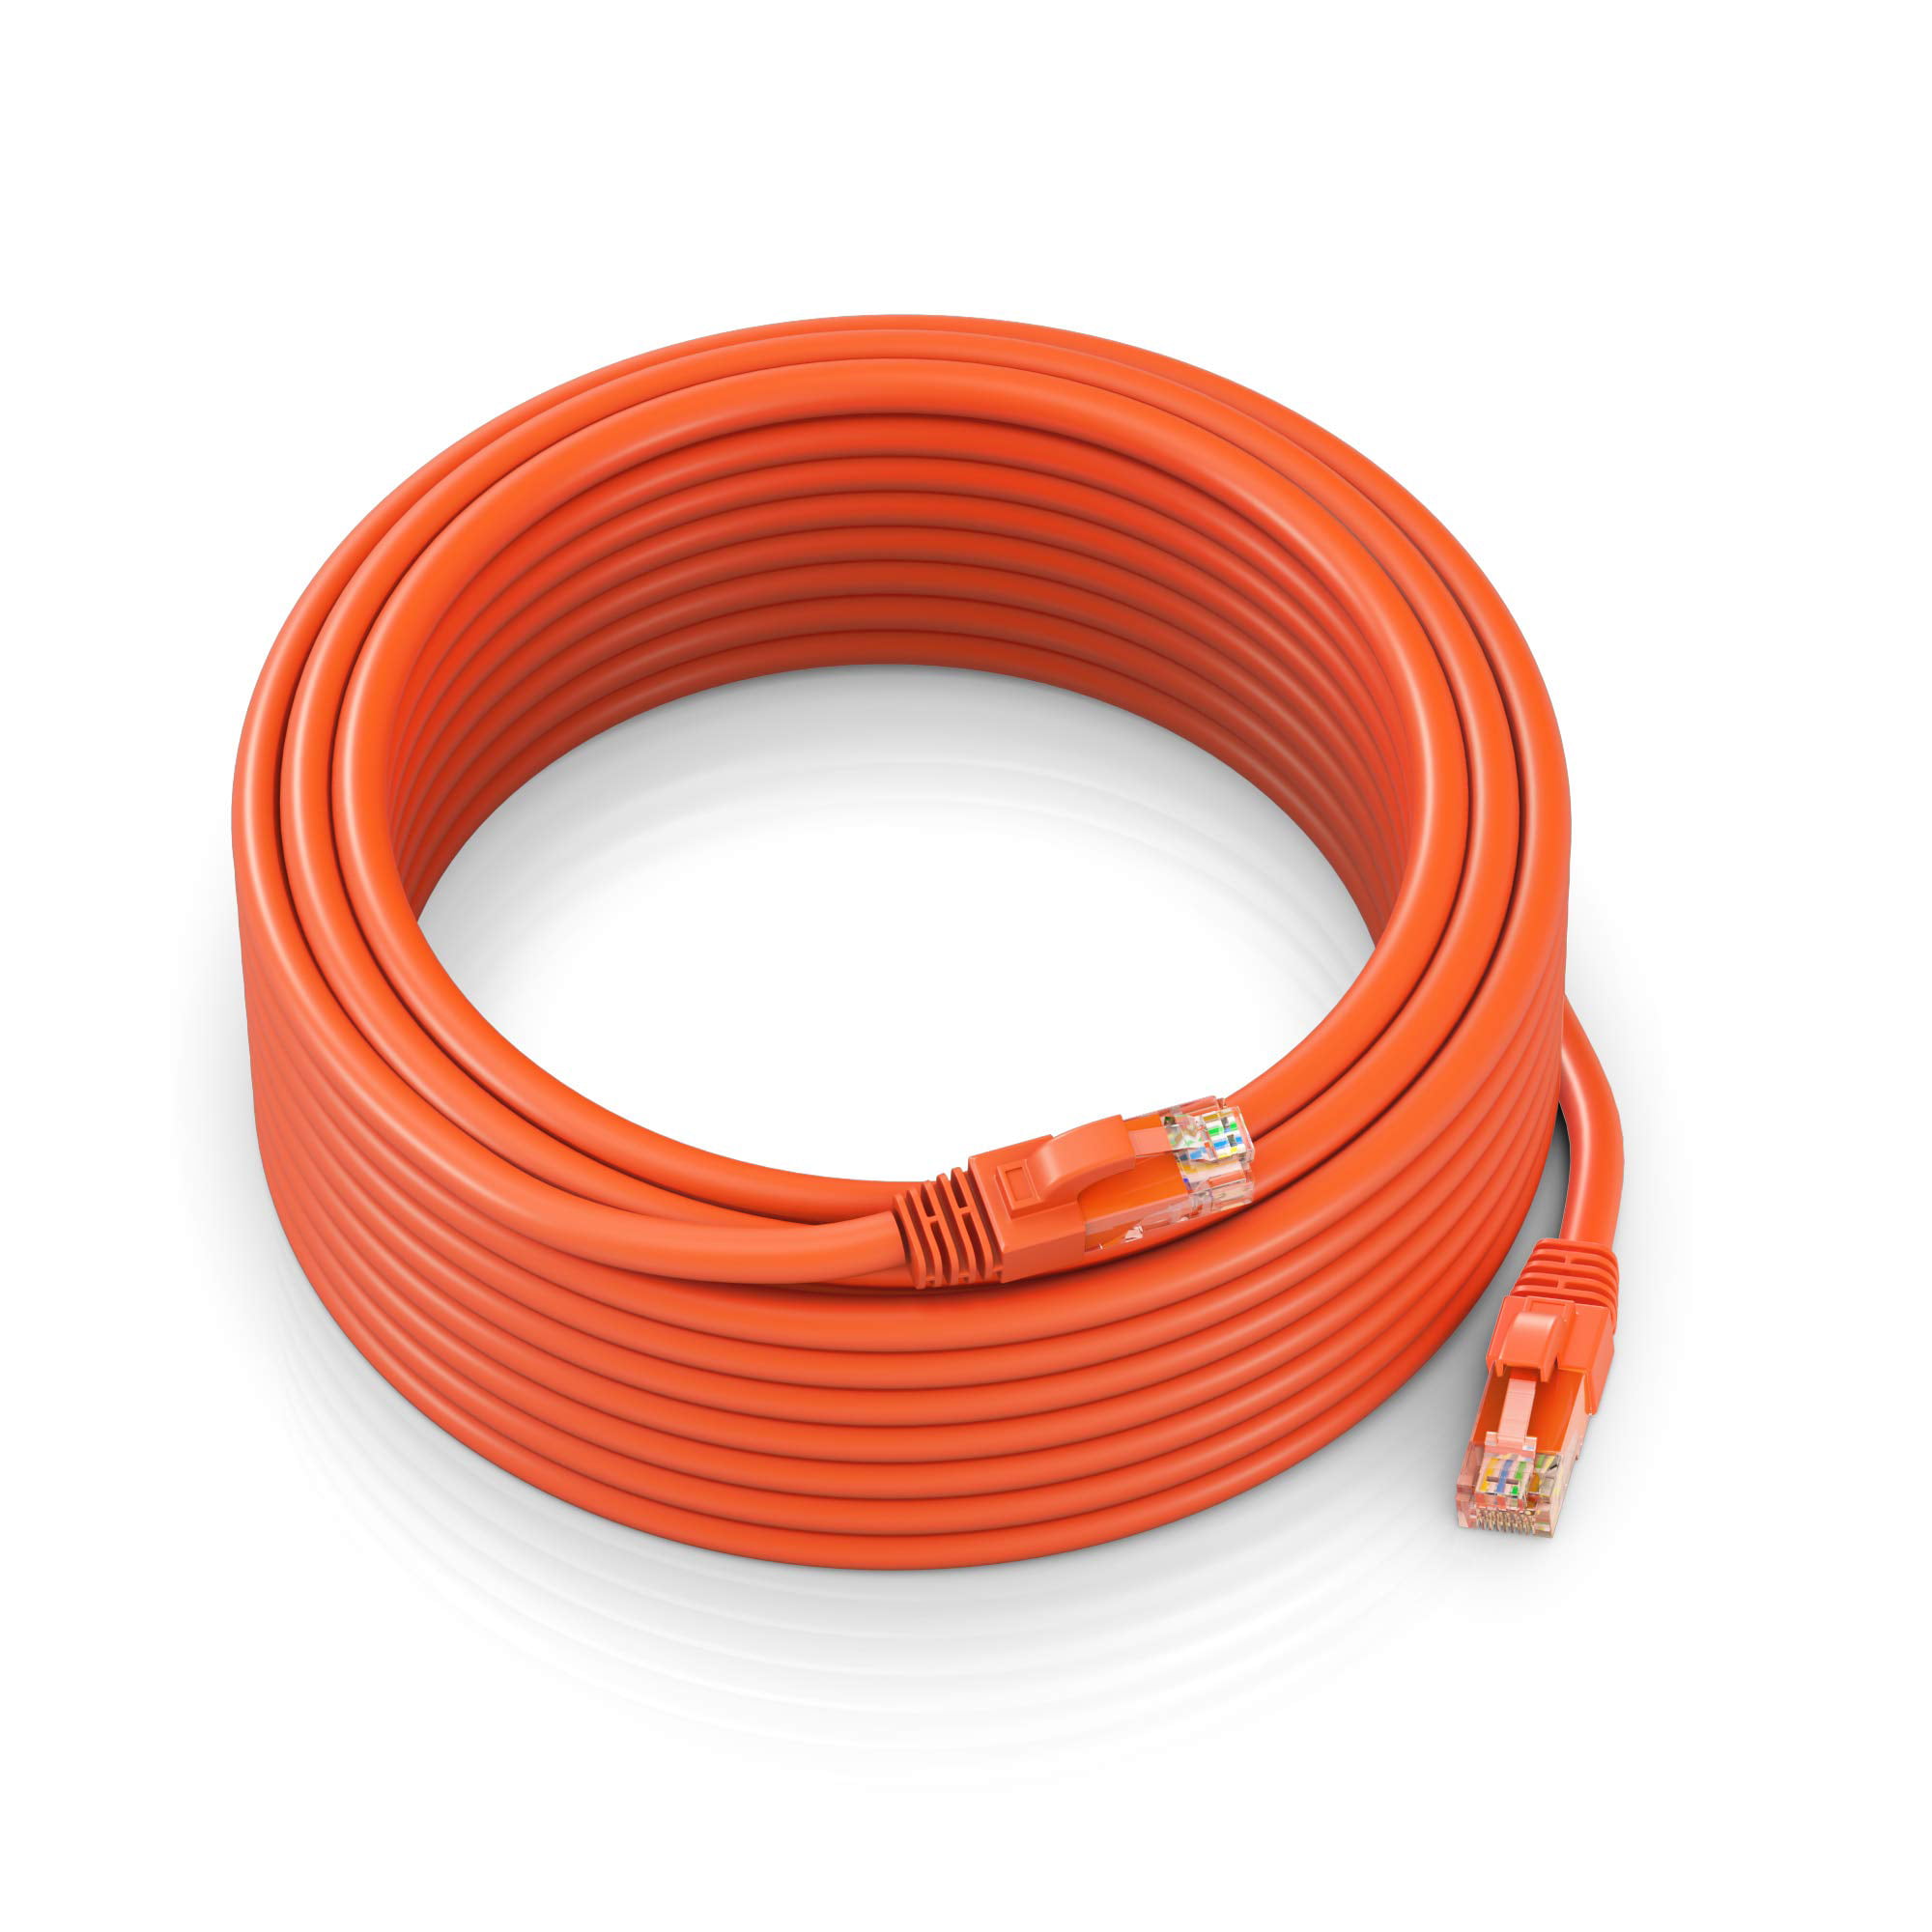 Ethernet Cable 300 ft CAT6 High Speed Internet Network LAN Patch Cable Cord  (300 feet, Orange)